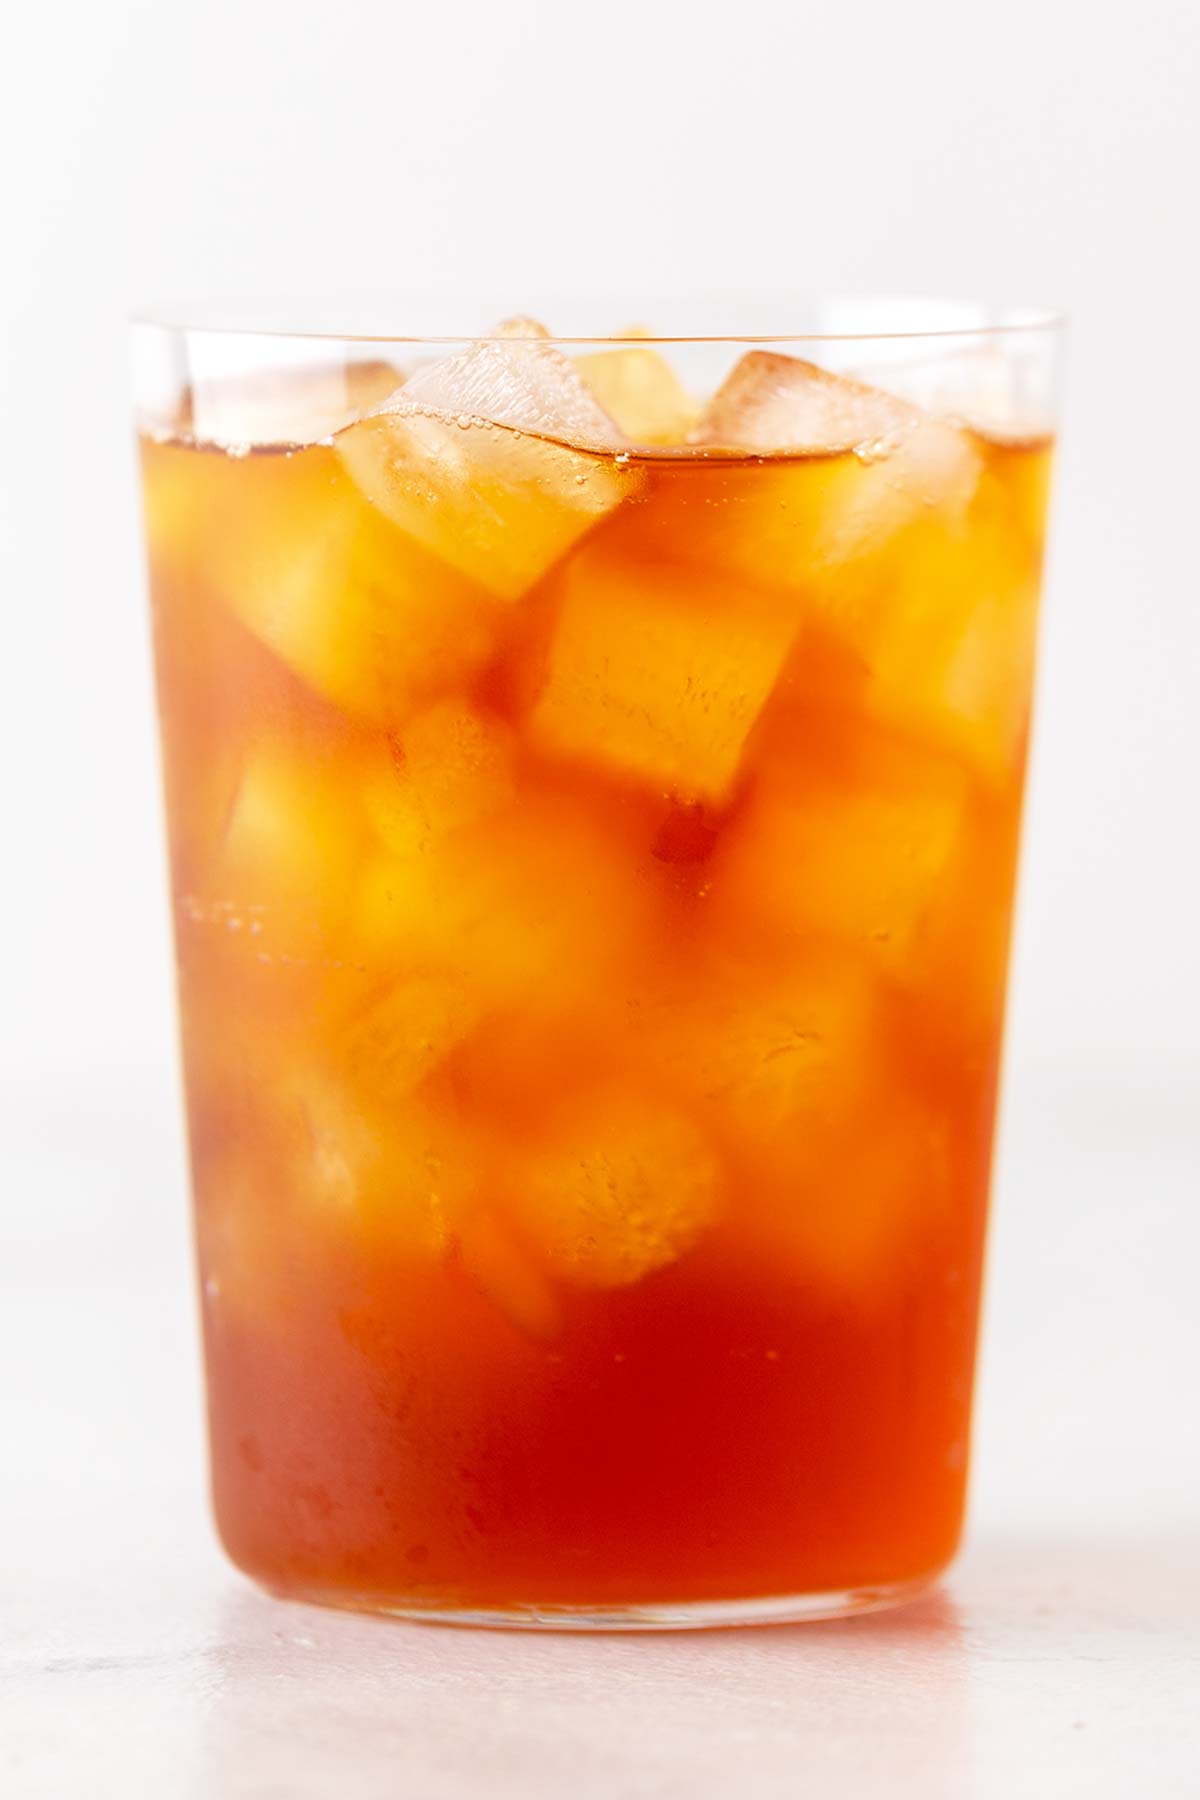 Photo of finished black iced tea with square ice cubes.